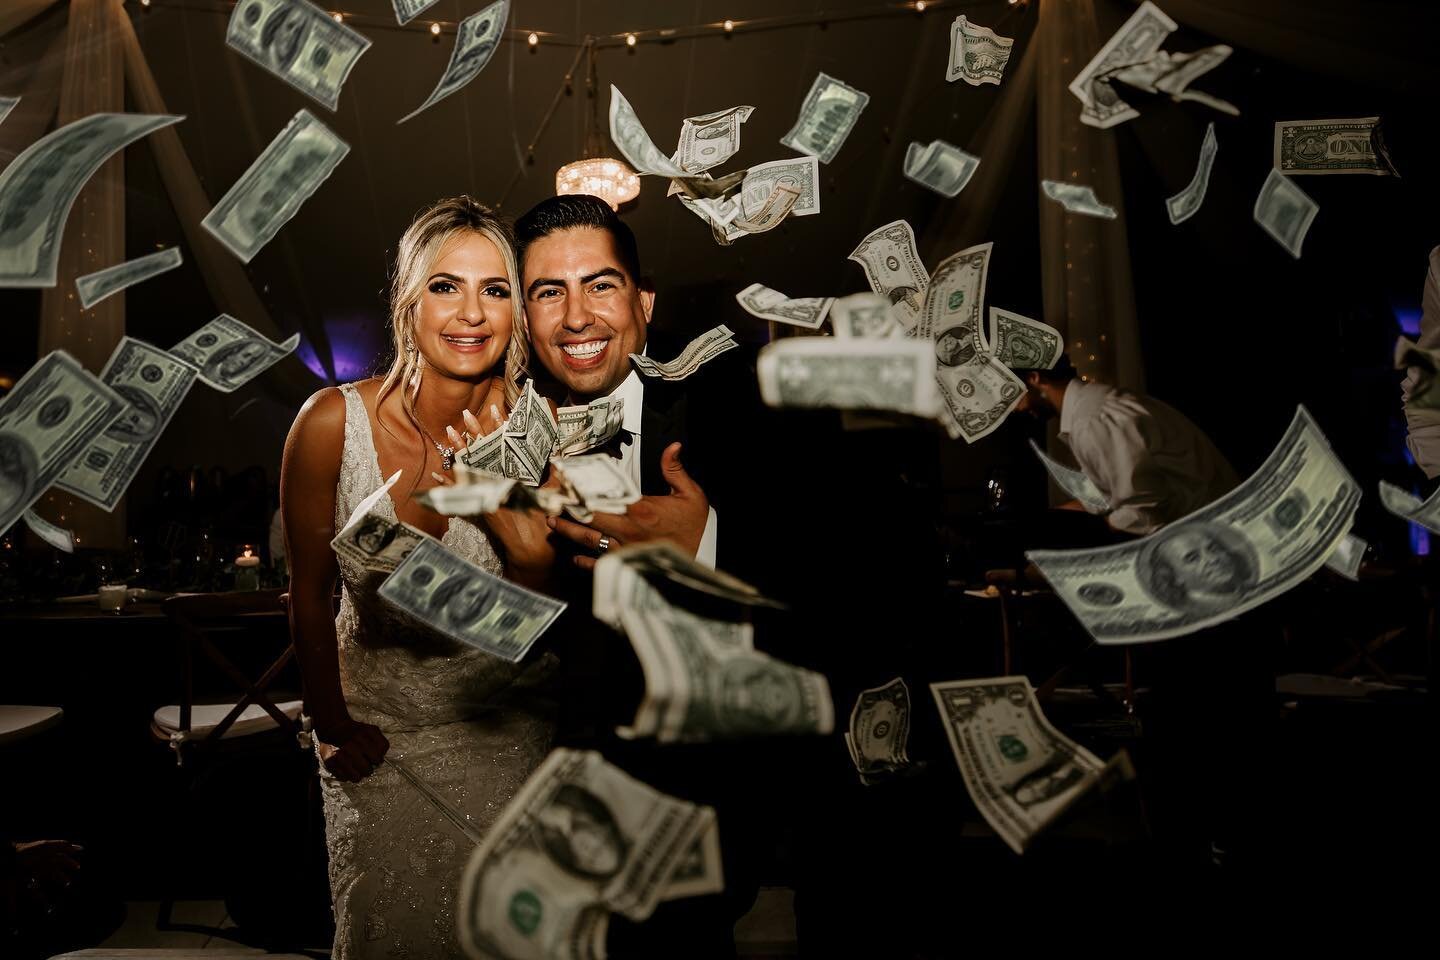 Raise your hand if you love a good money shot!!! 🙋&zwj;♂️🙋&zwj;♀️🙋&zwj;♂️🙋&zwj;♀️🙋&zwj;♂️😉🙋&zwj;♀️🙋&zwj;♂️

Venue - @nellaterra
Coordinator- @simplylovely_events 
Hair - @indep_hairstylist
MUA - @makeupby_vane